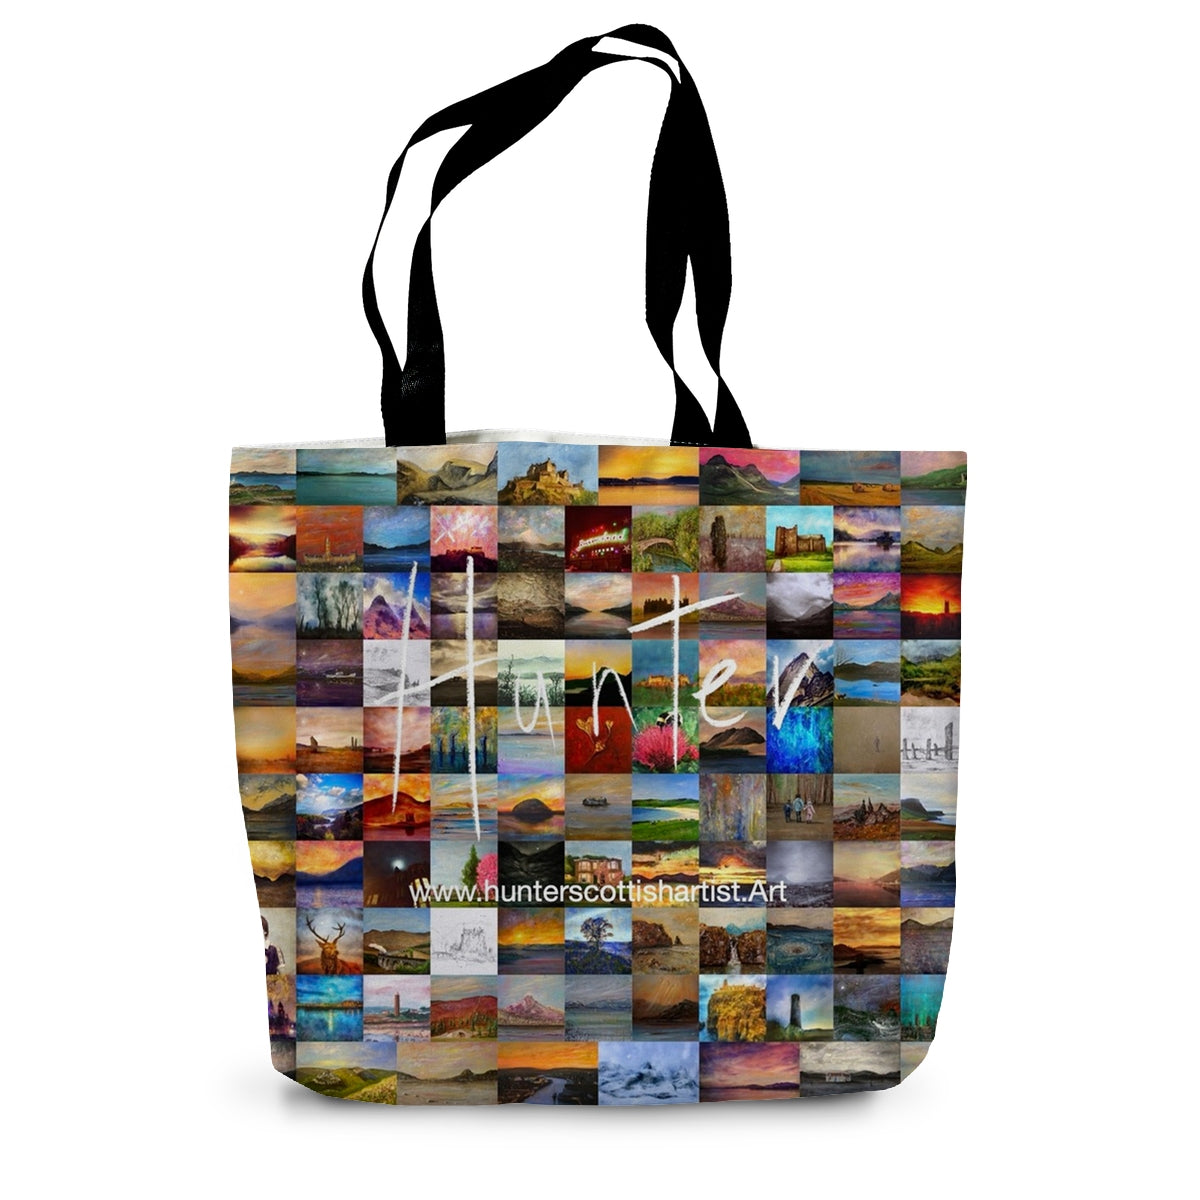 An Ethereal Loch Lomond Art Gifts Canvas Tote Bag